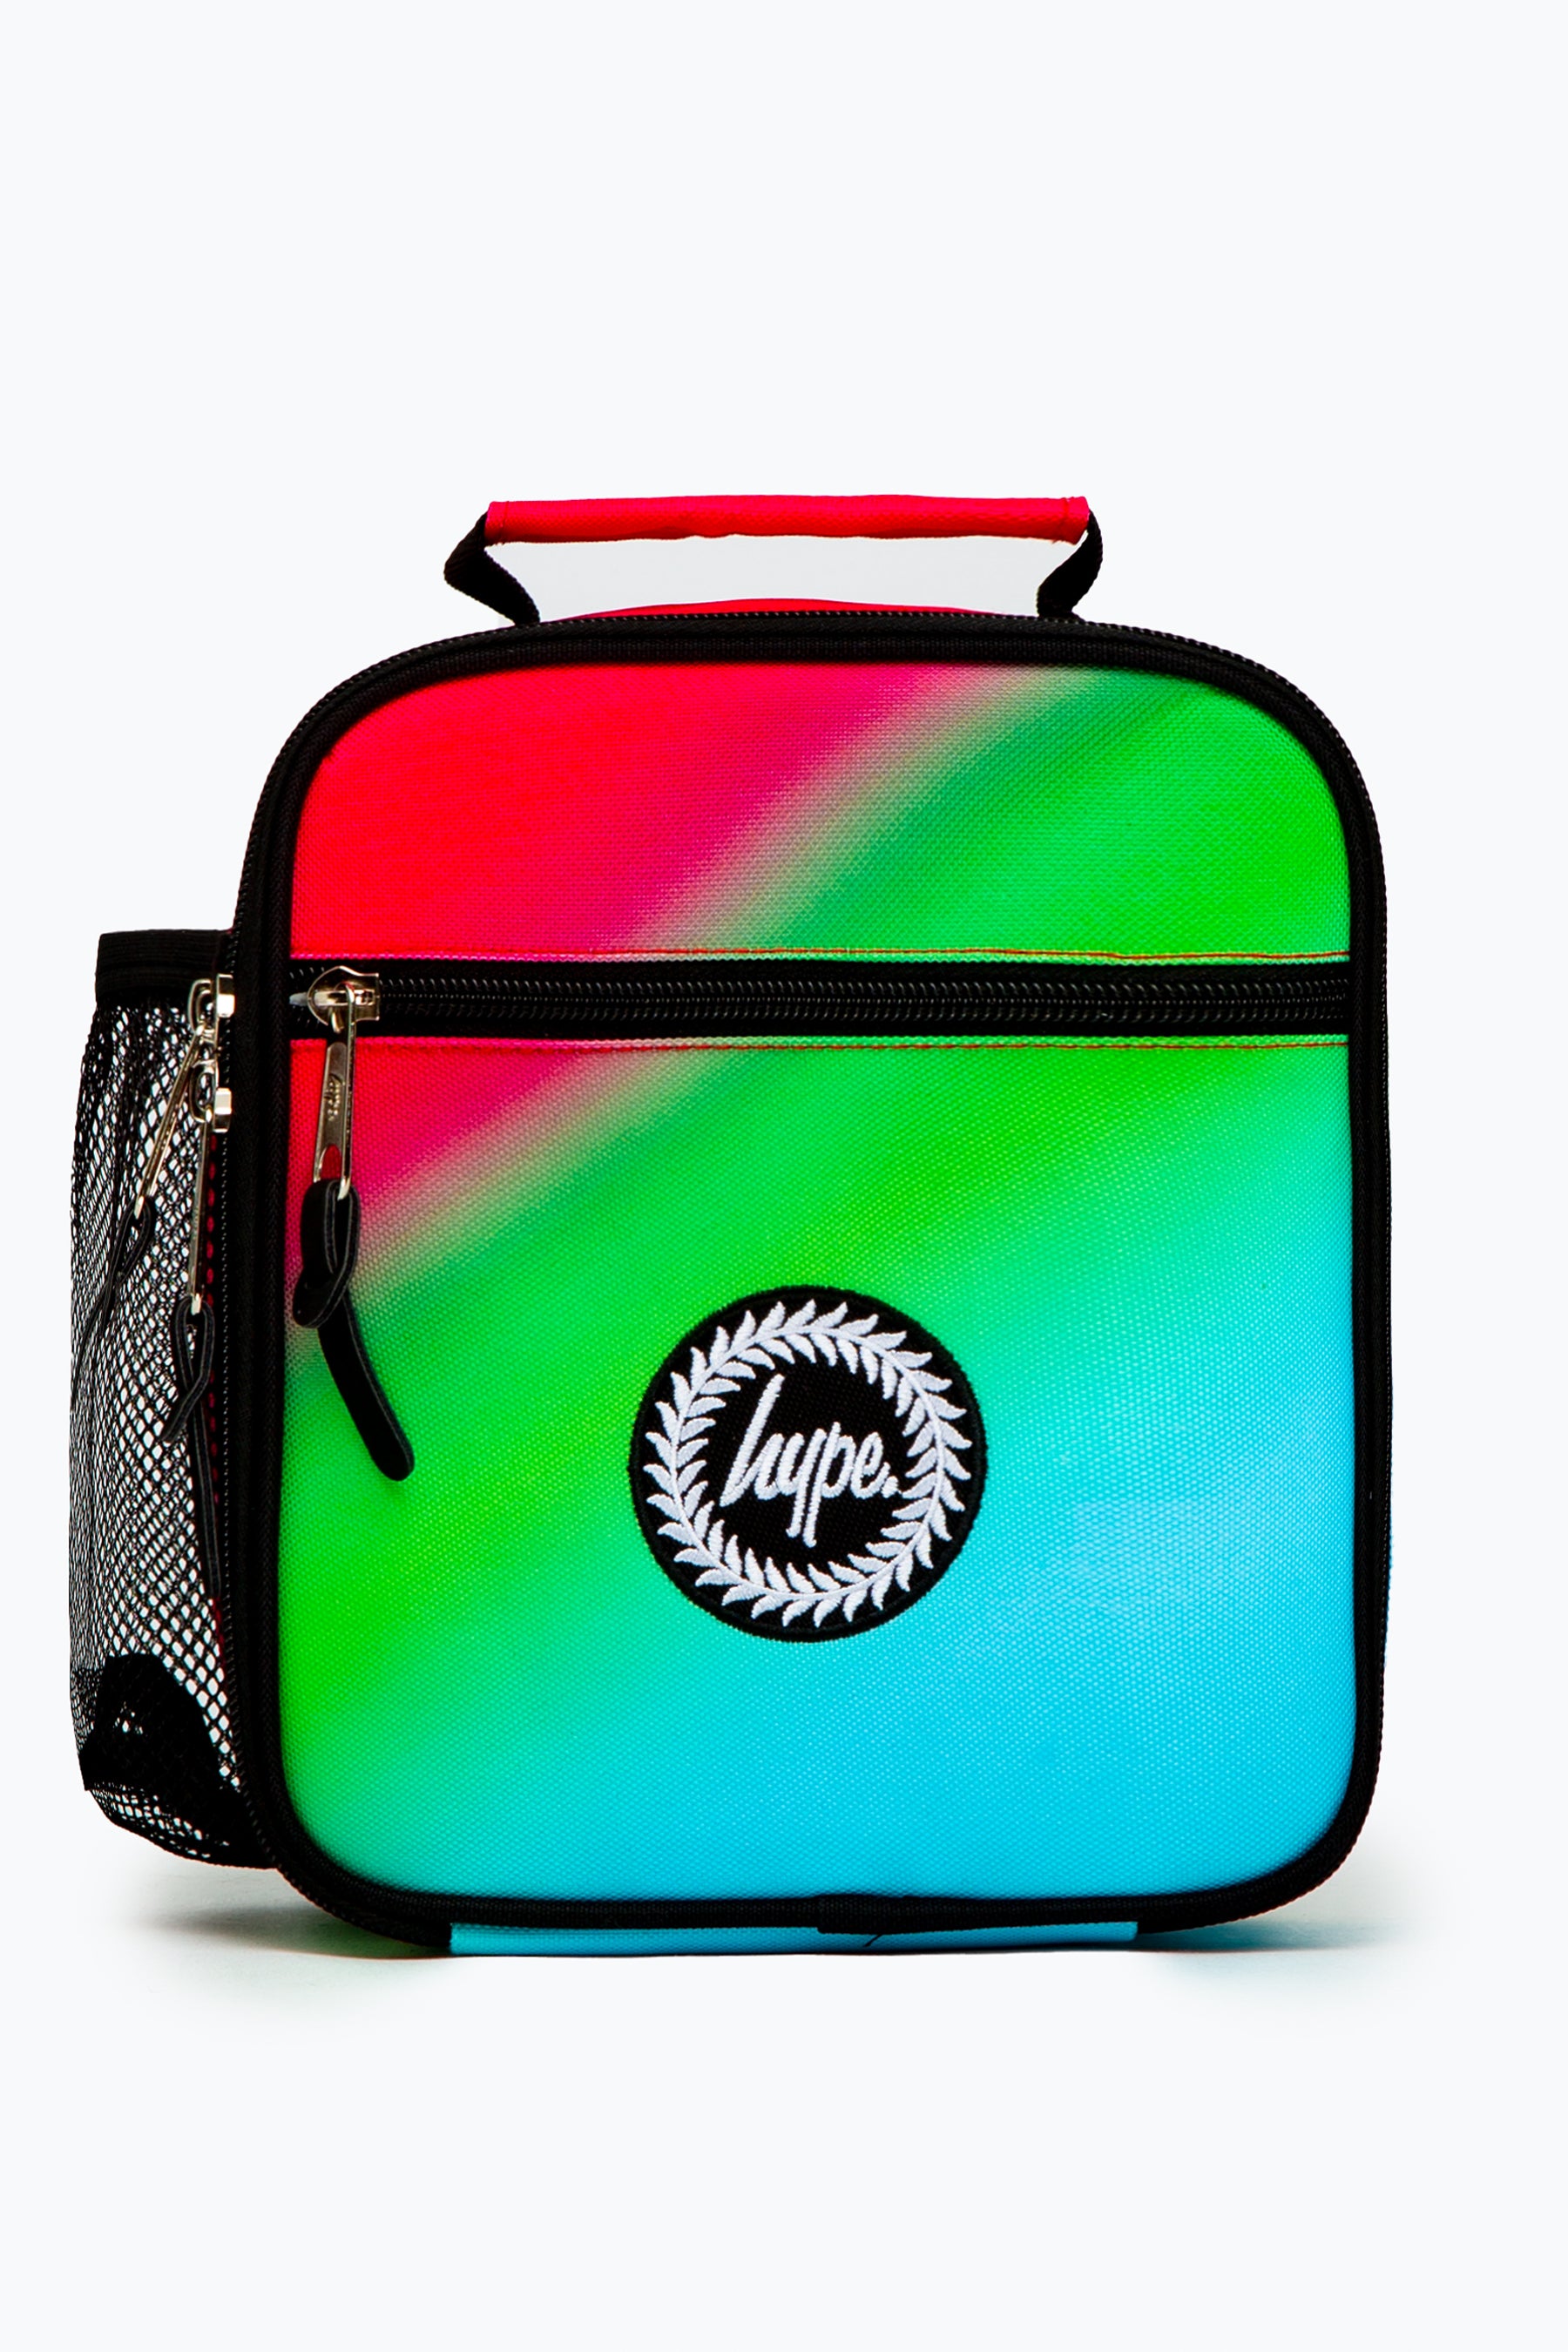 HYPE ASYMMETRIC PINK TO BLUE FADE LUNCH BOX | Hype.